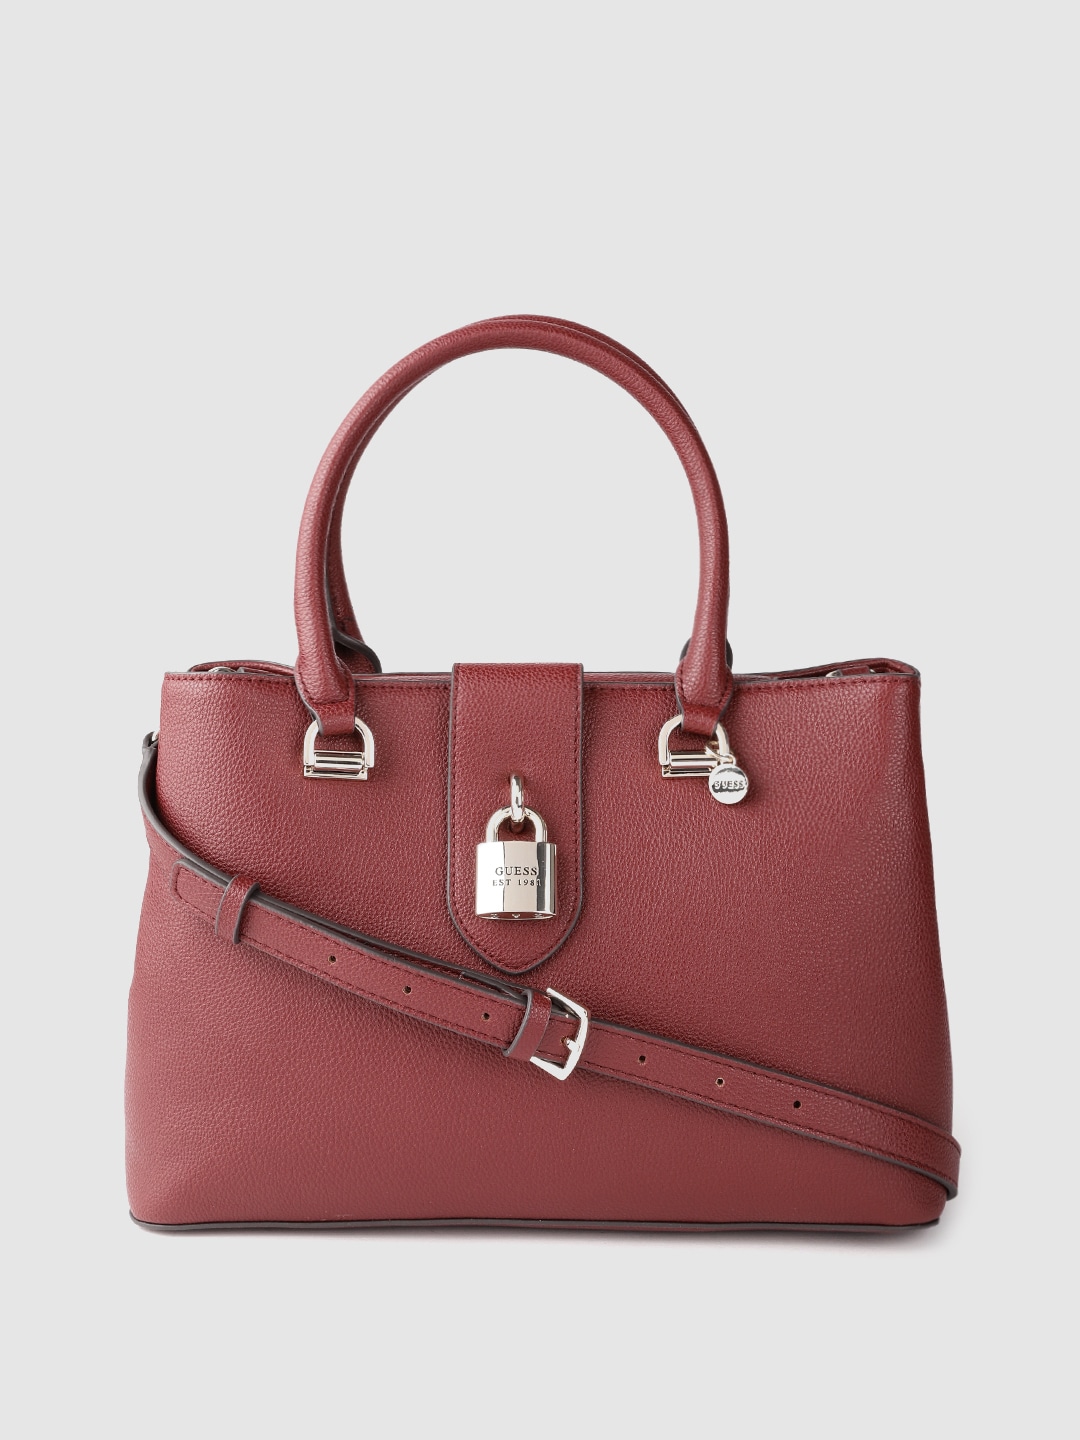 GUESS Burgundy Solid Structured Shoulder Bag with Detachable Sling Strap & Pouch Price in India